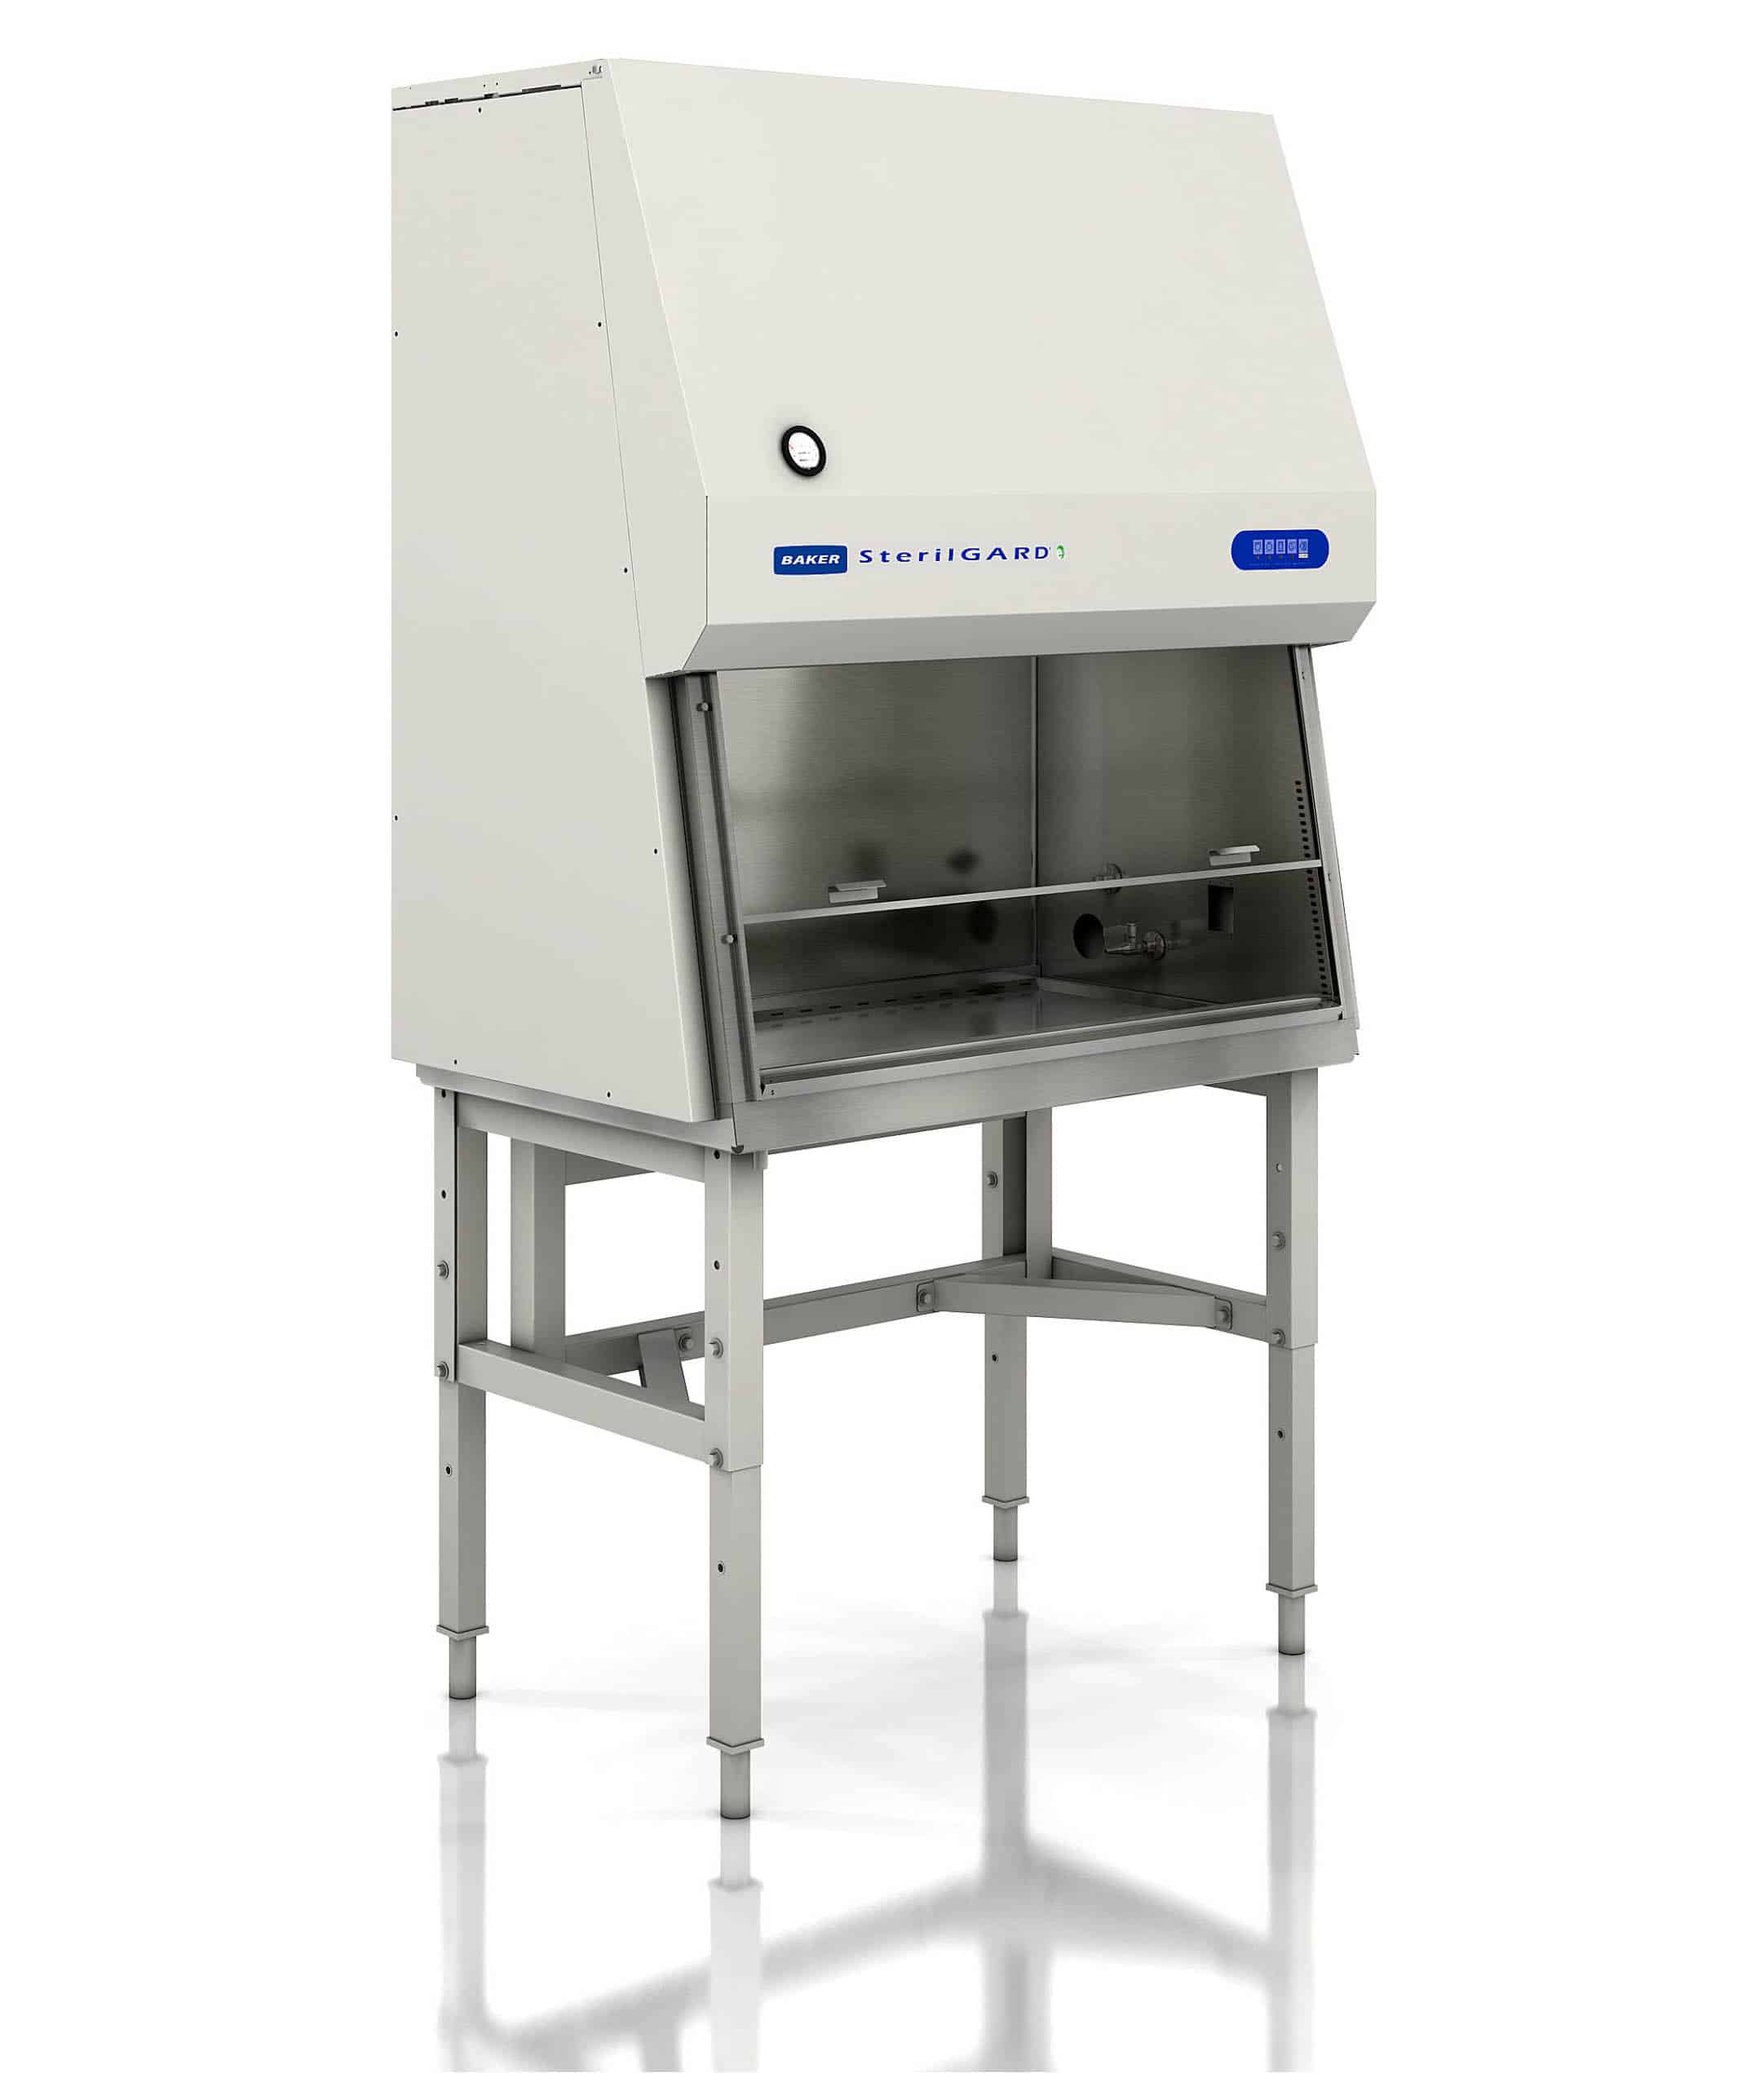 scientific equipment suppliers - find the right biosafety cabinet for your lab